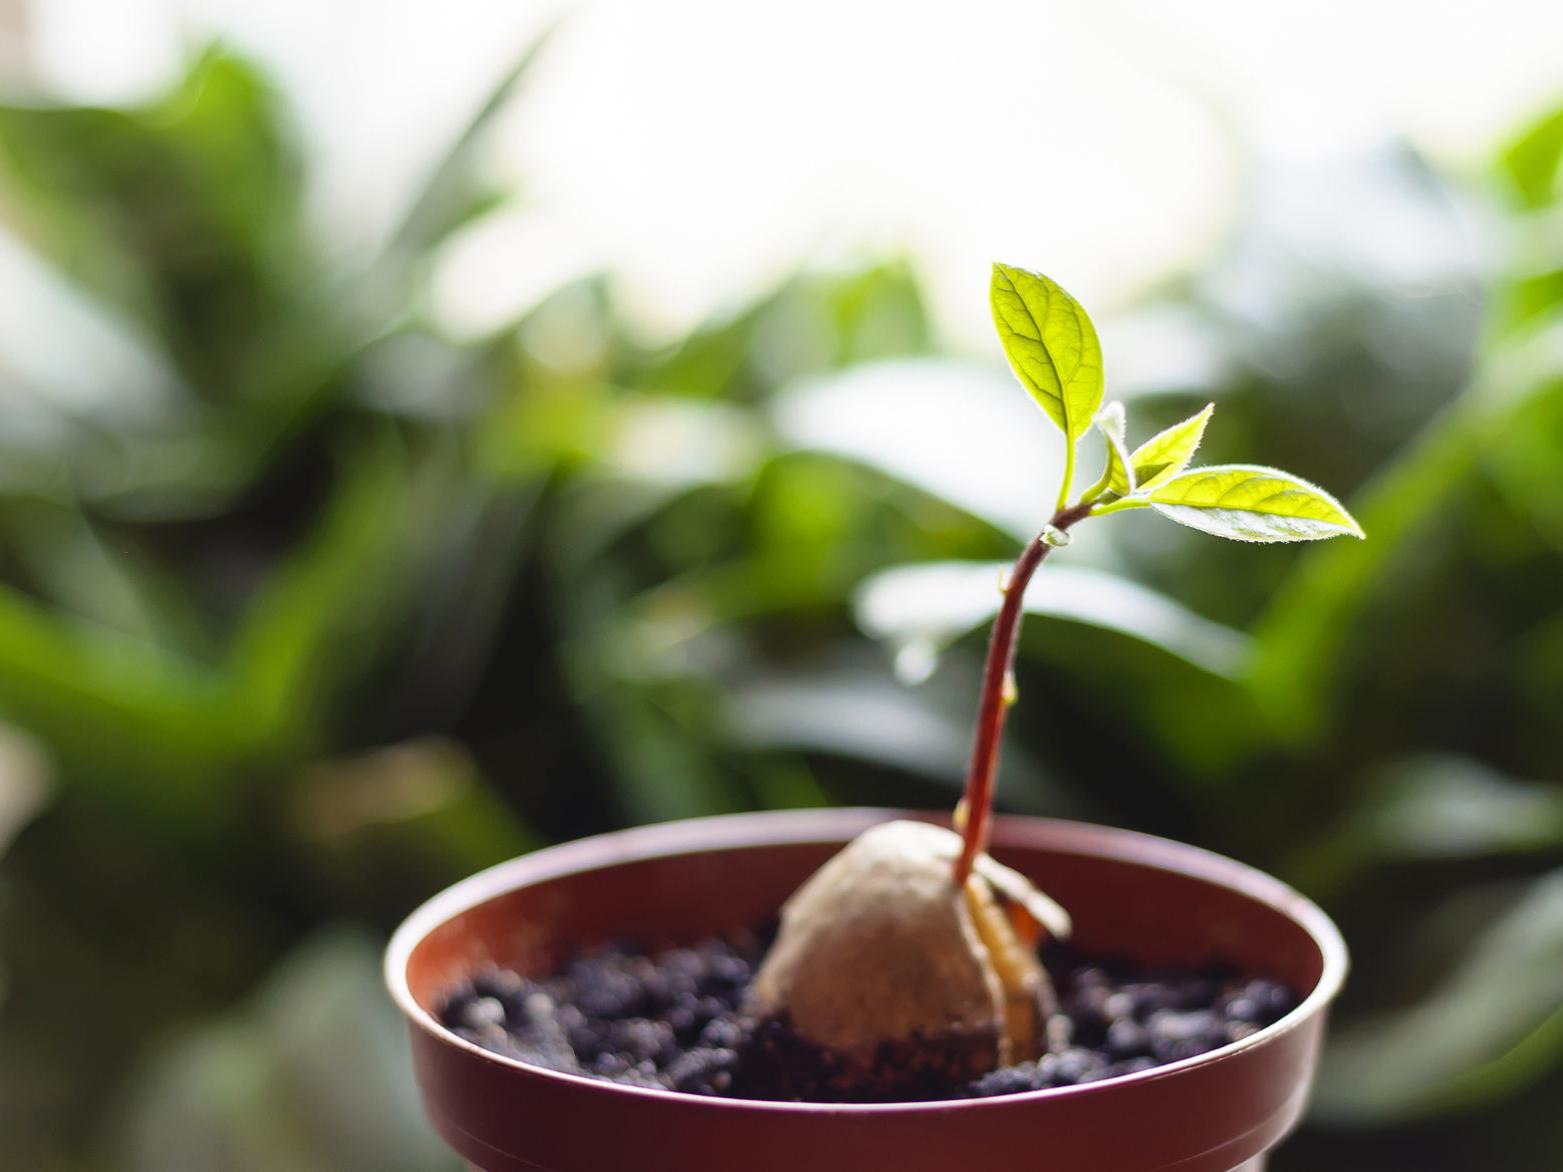 How to plant avocado seed in a pot?